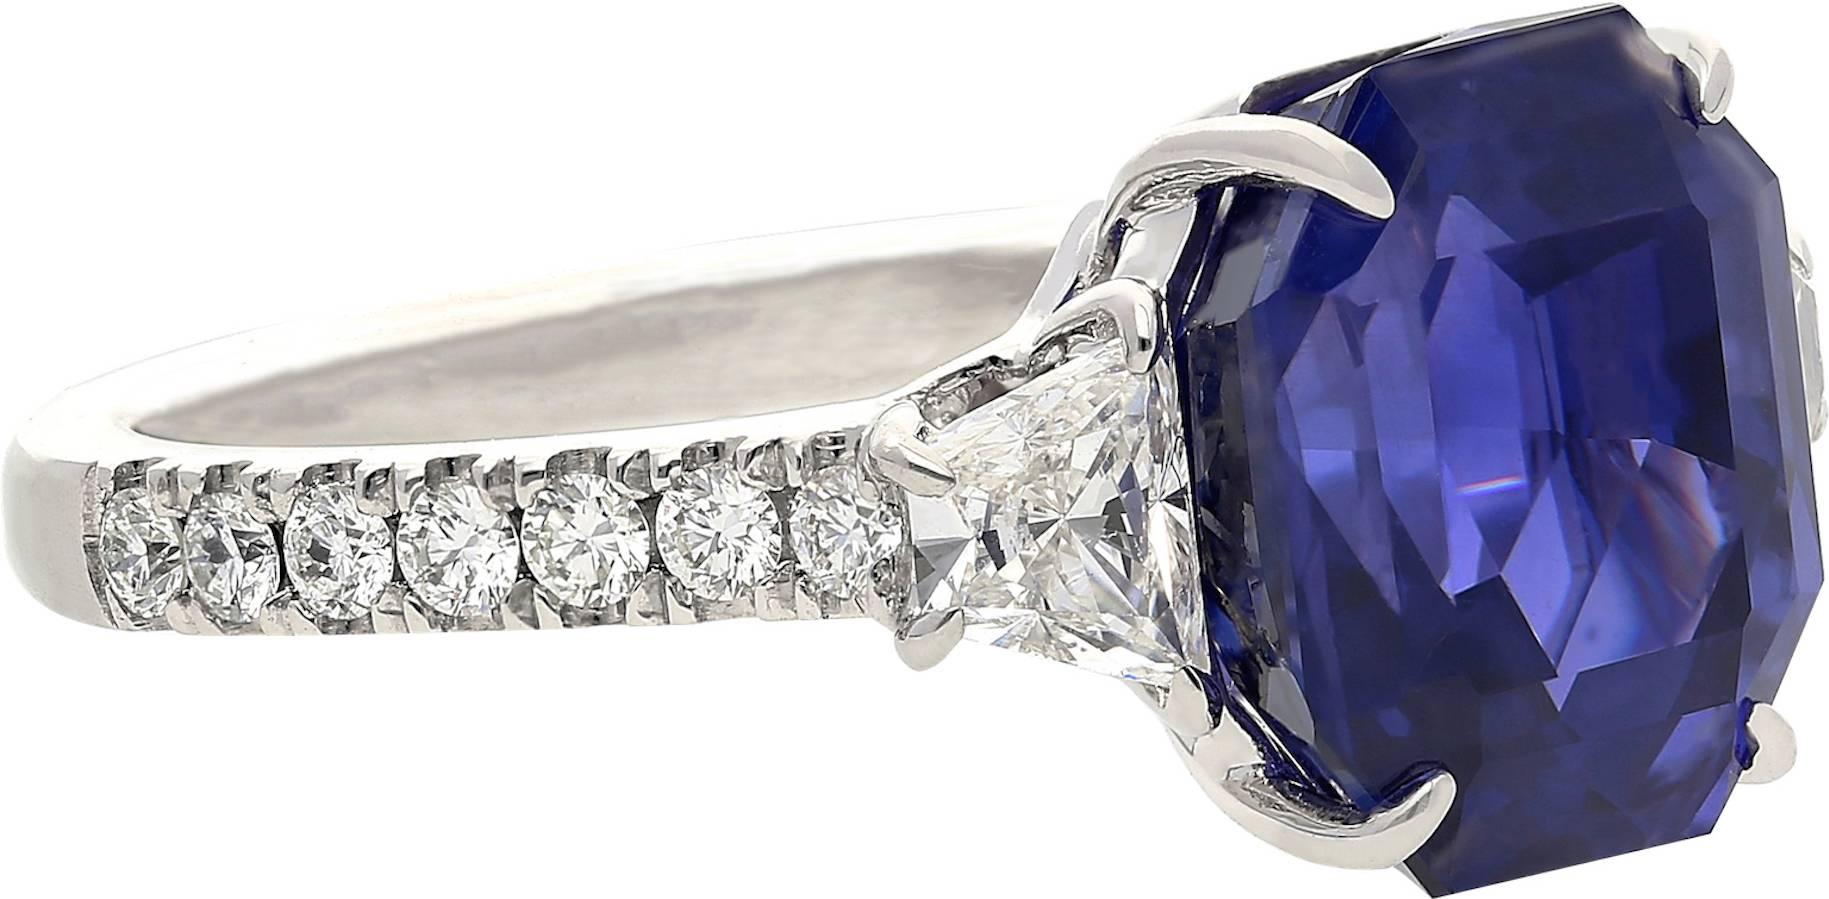 Set in 18k White Gold.
Certified by SSEF to be of Sri-Lanka origin,  Emerald-Cut, and free of thermal enhancement (unheated). 
Total weight 8.17 carats (0.98 carat diamond weight)
The Sapphire is classified as a "color-change" sapphire,